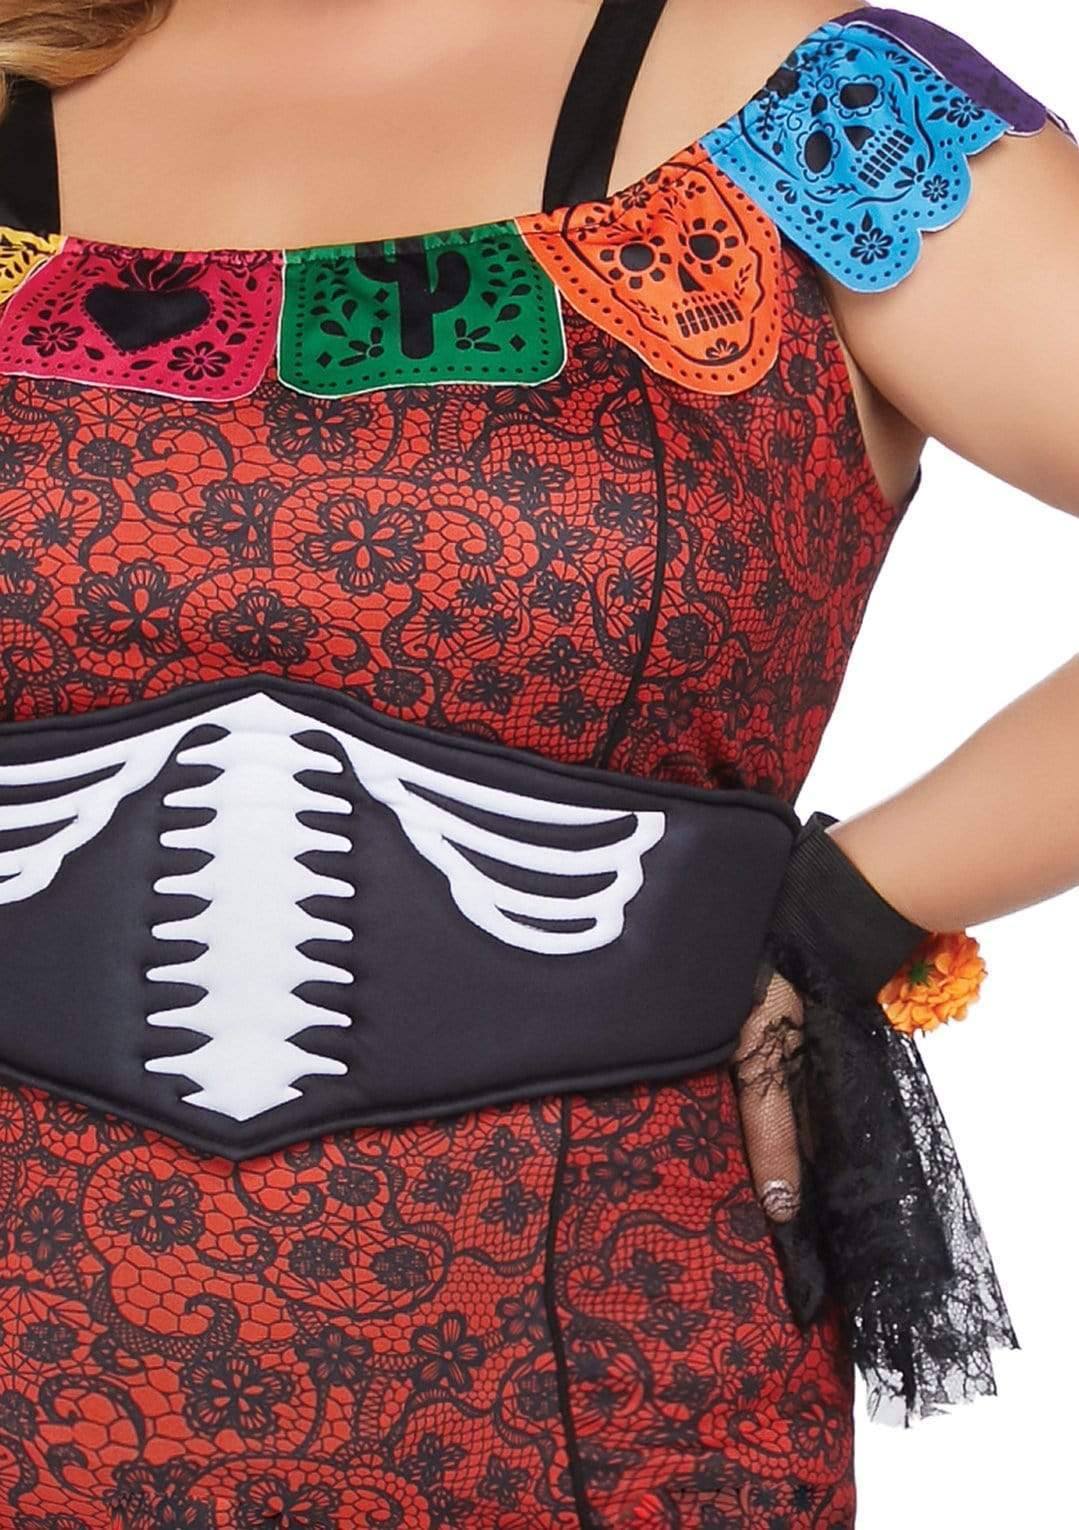 Plus Deluxe Day of the Dead Beauty Costume